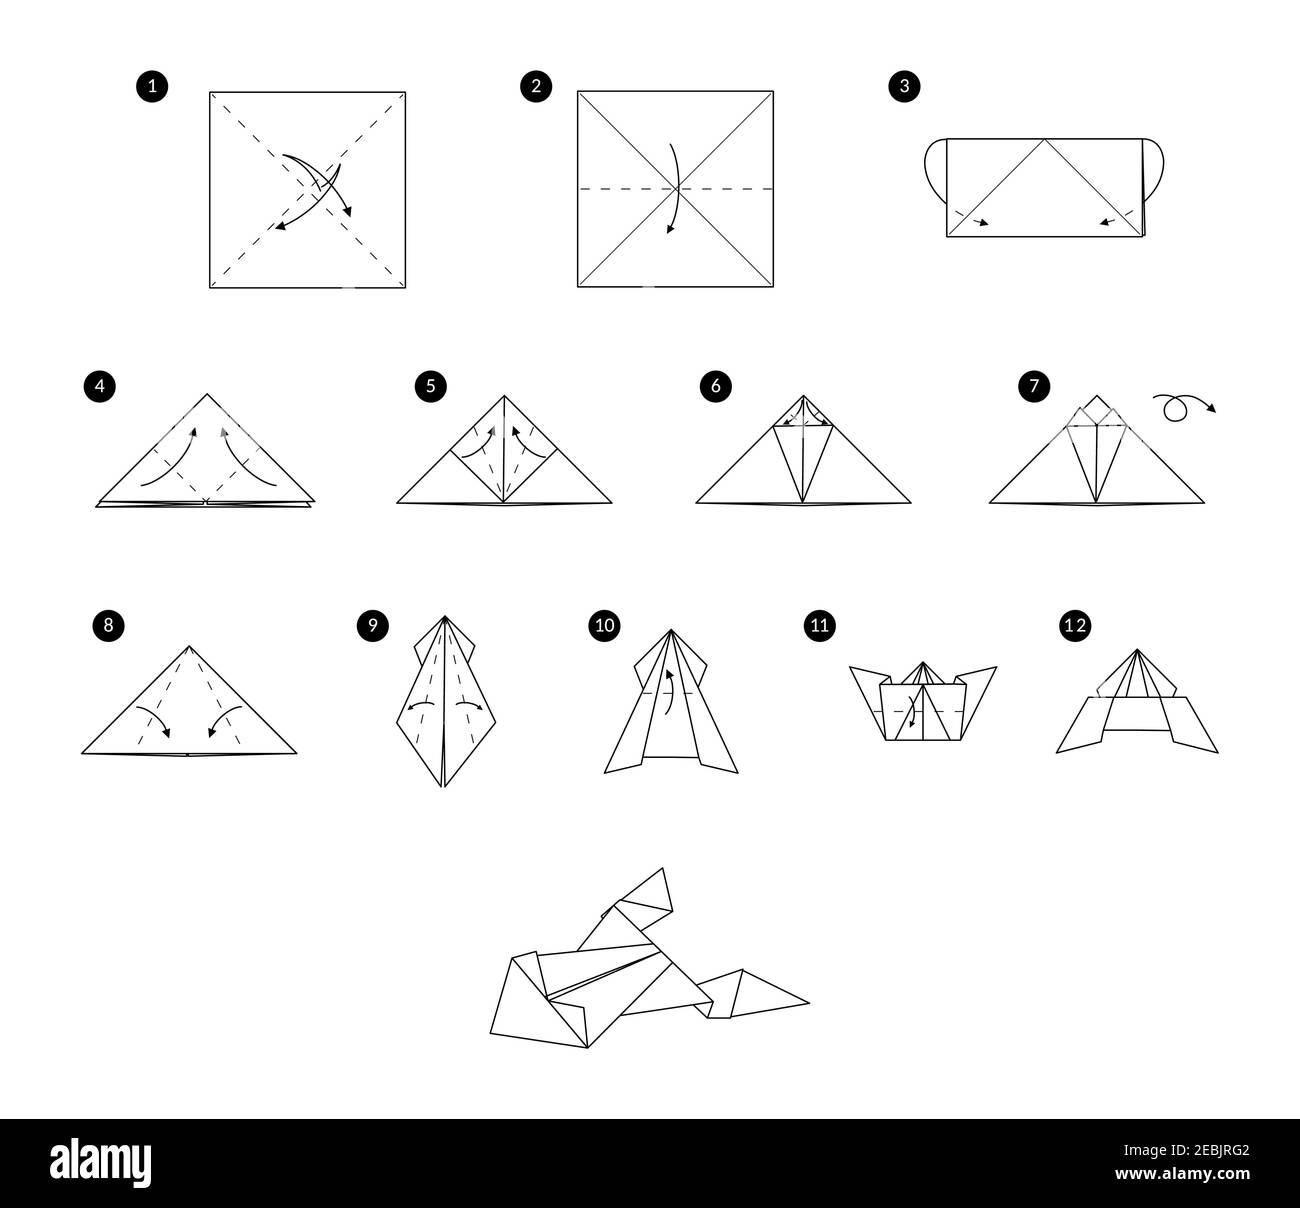 Origami An Instructions Square Paper